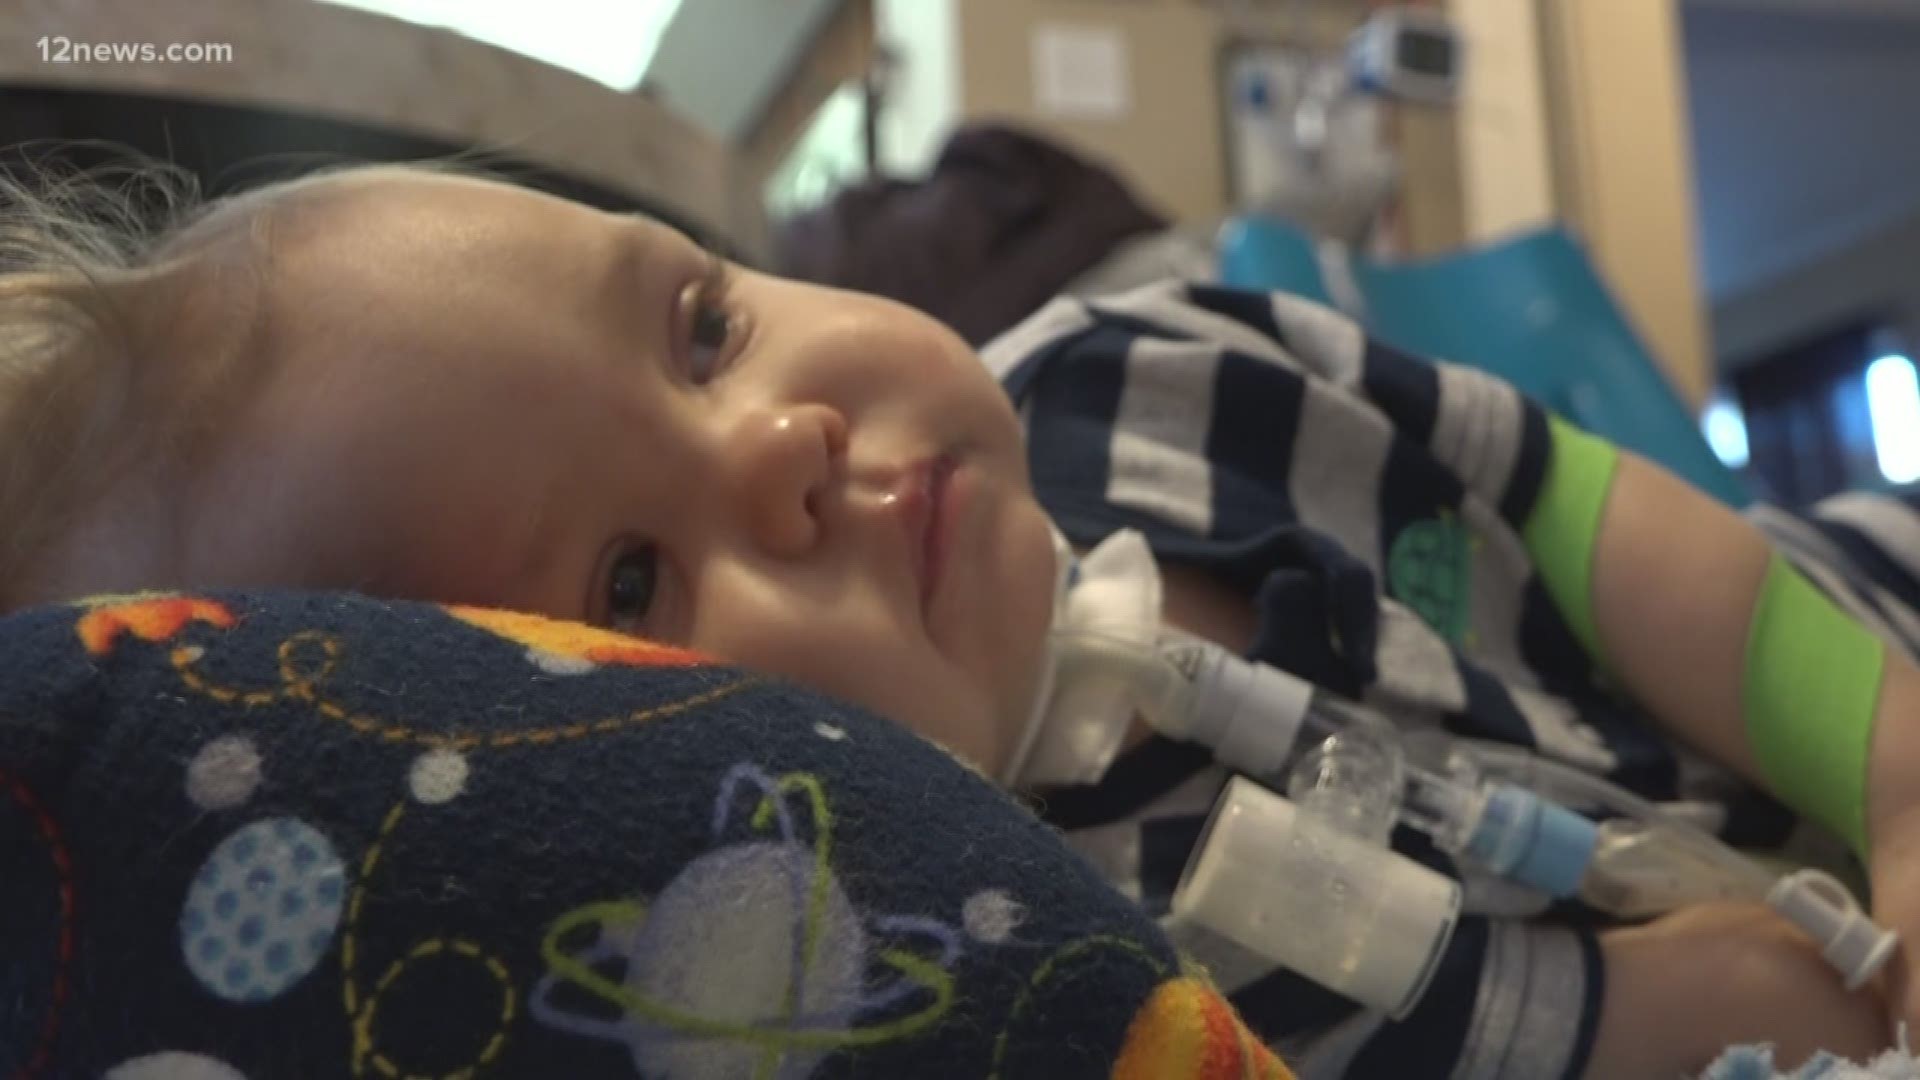 Baby Cooper suddenly became paralyzed back in September. His doctors diagnosed him with acute flaccid myletis (AFM), a rare, polio-like disease that has been seen popping up across the country.